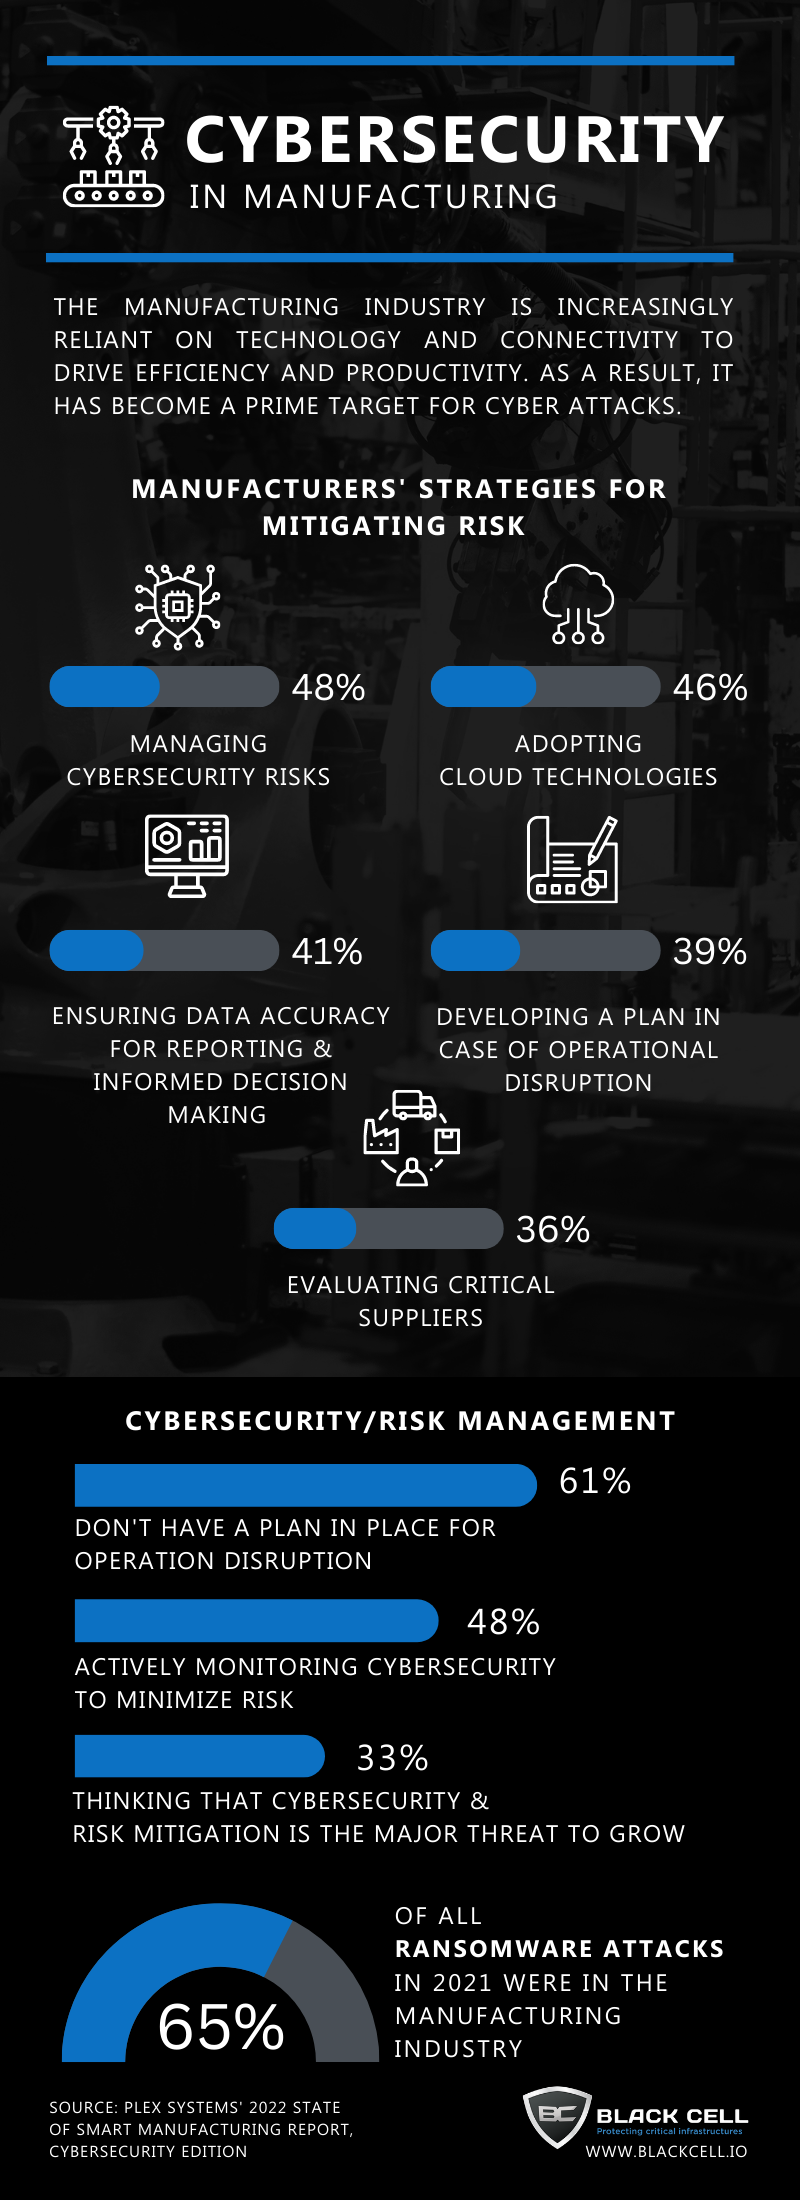 Cybersecurity in manufacturing | Infographic